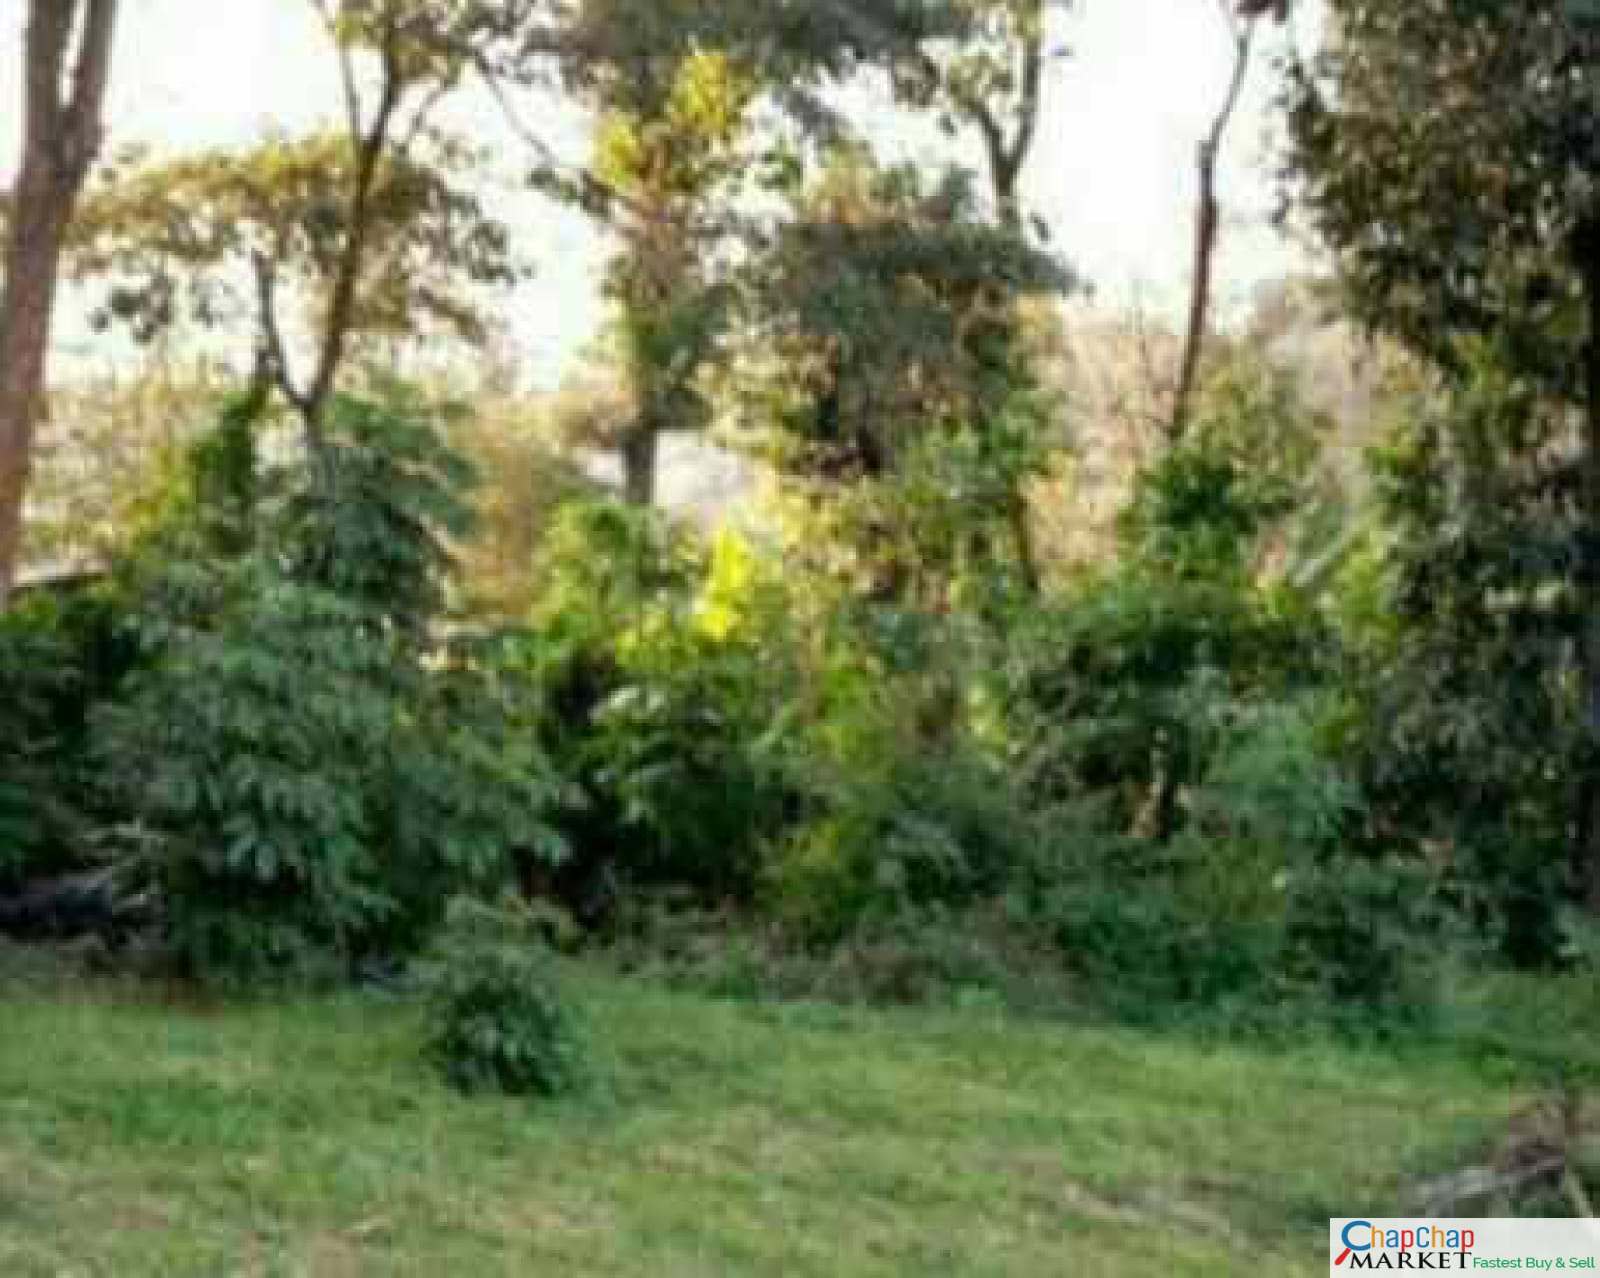 Land For Sale Real Estate-Land for sale in Karen plains Half Acre each Ready Title Deed QUICK SALE 1/2 0.5 acre Exclusive 🔥